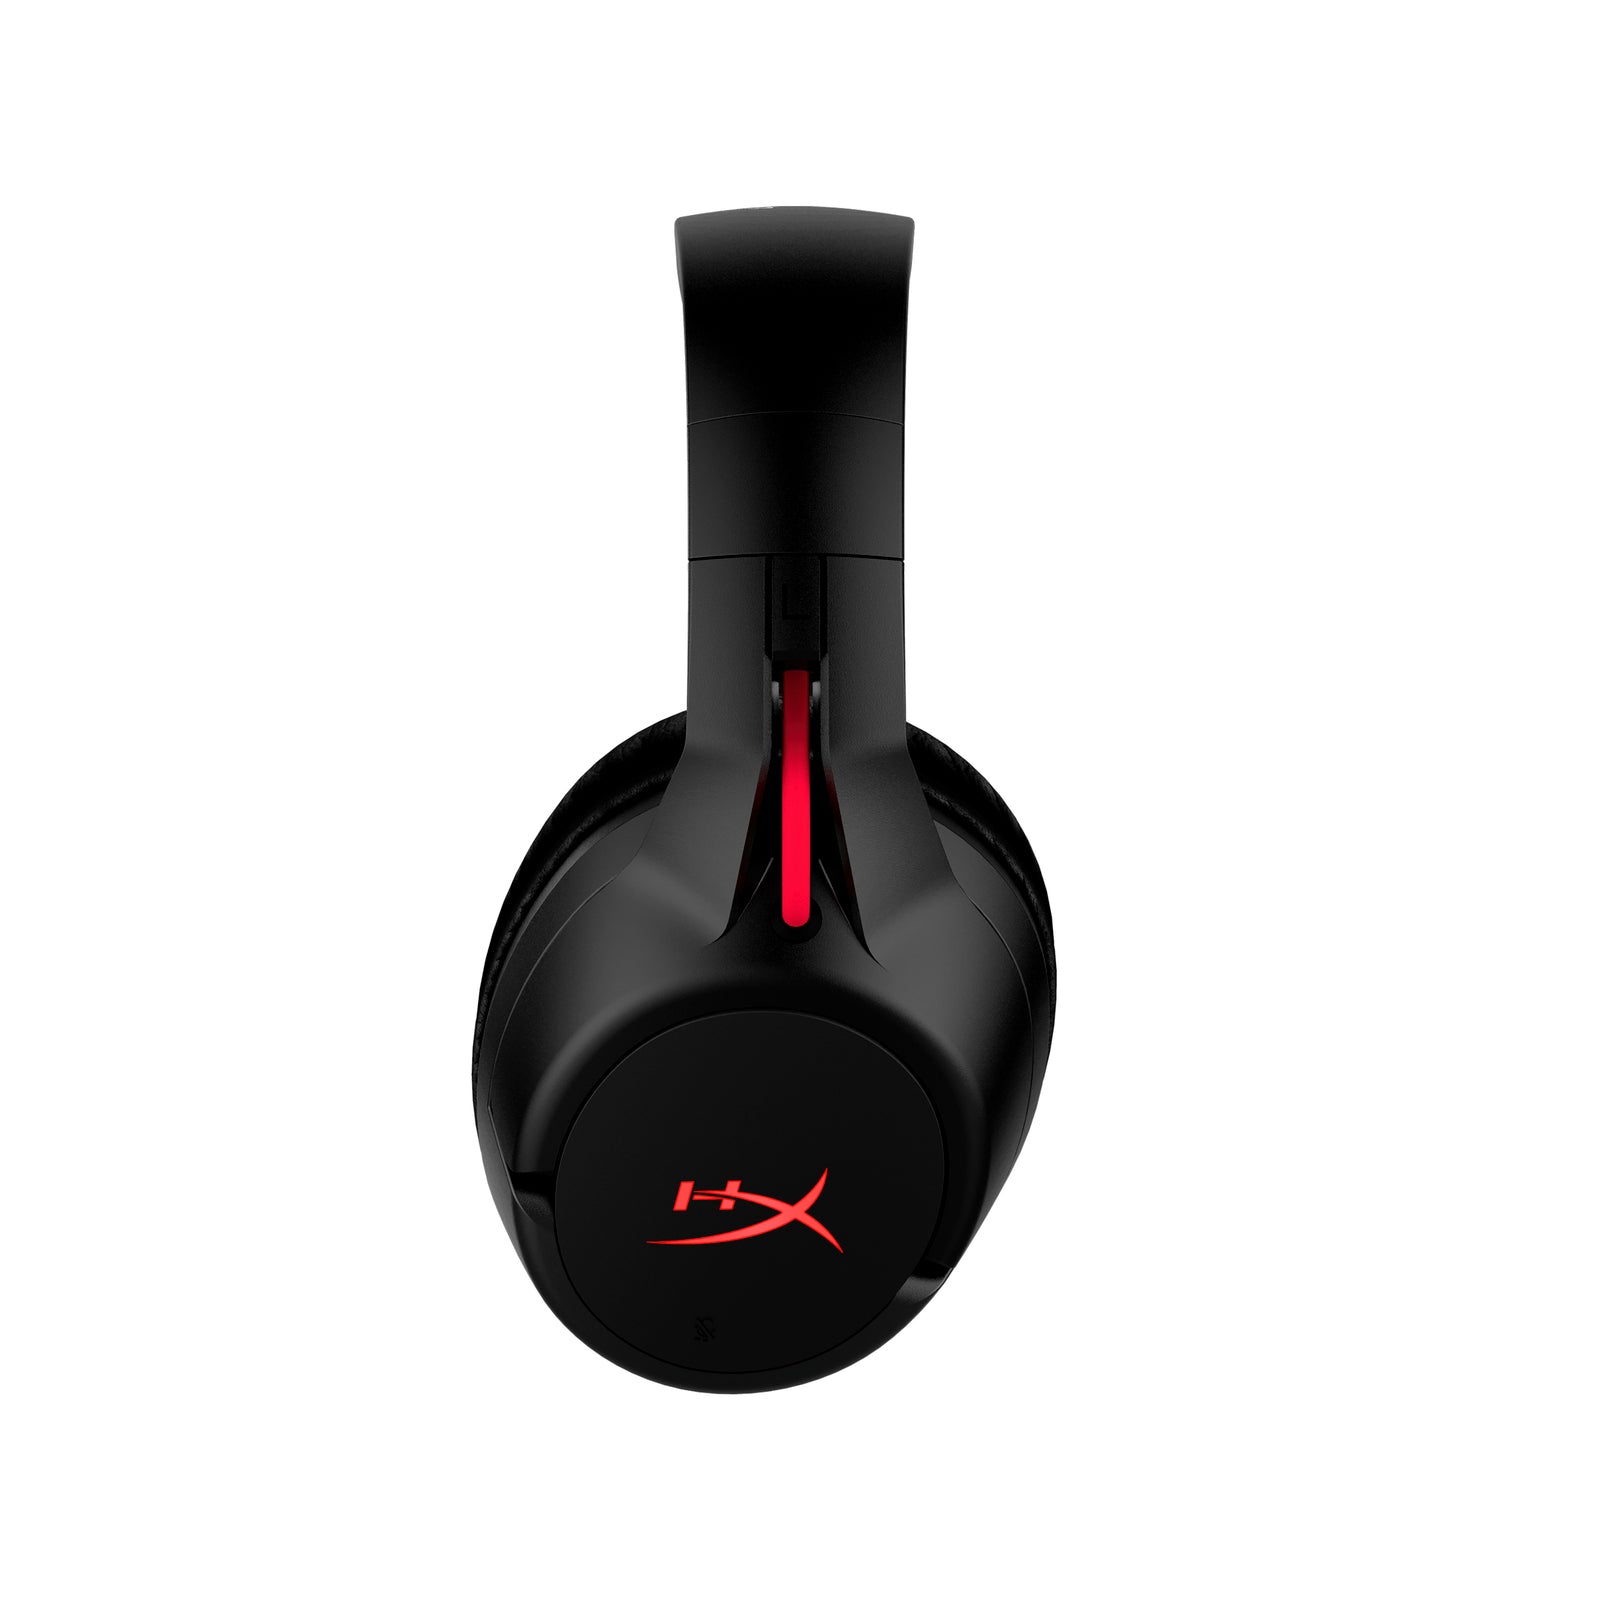 Cloud Flight – Wireless USB Headset for PC and PS4™ | HyperX